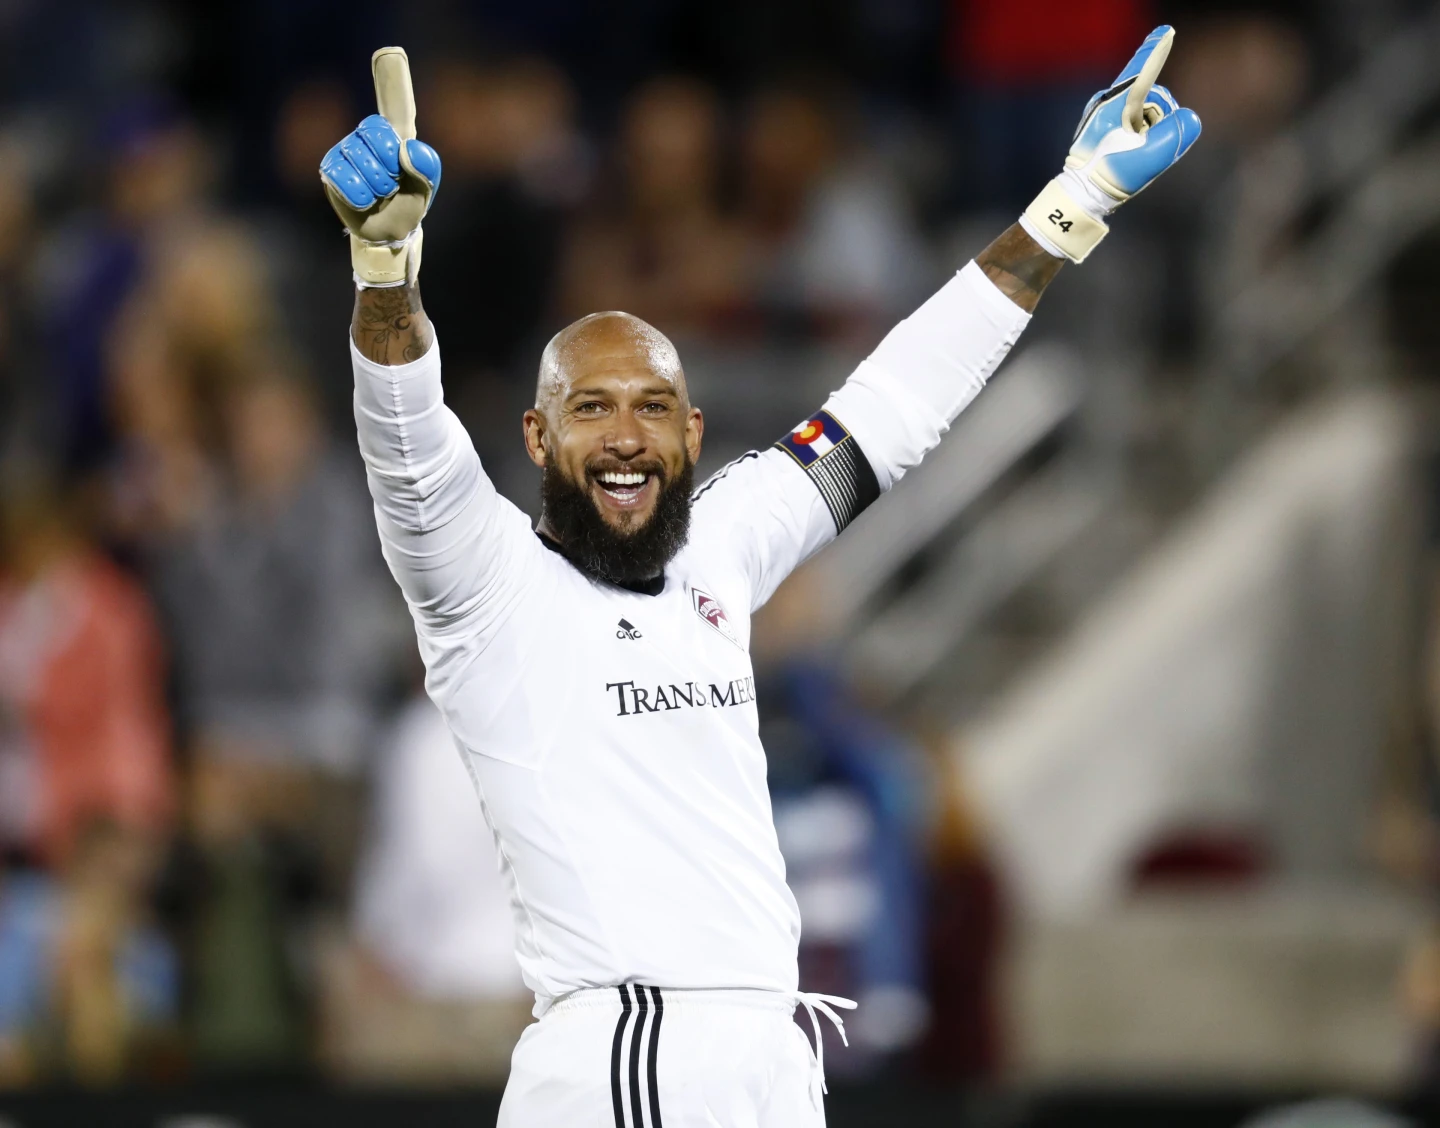 "It is the honor of my life,” says American goalkeeping legend Tim Howard as he enters the U.S. National Soccer Hall of Fame